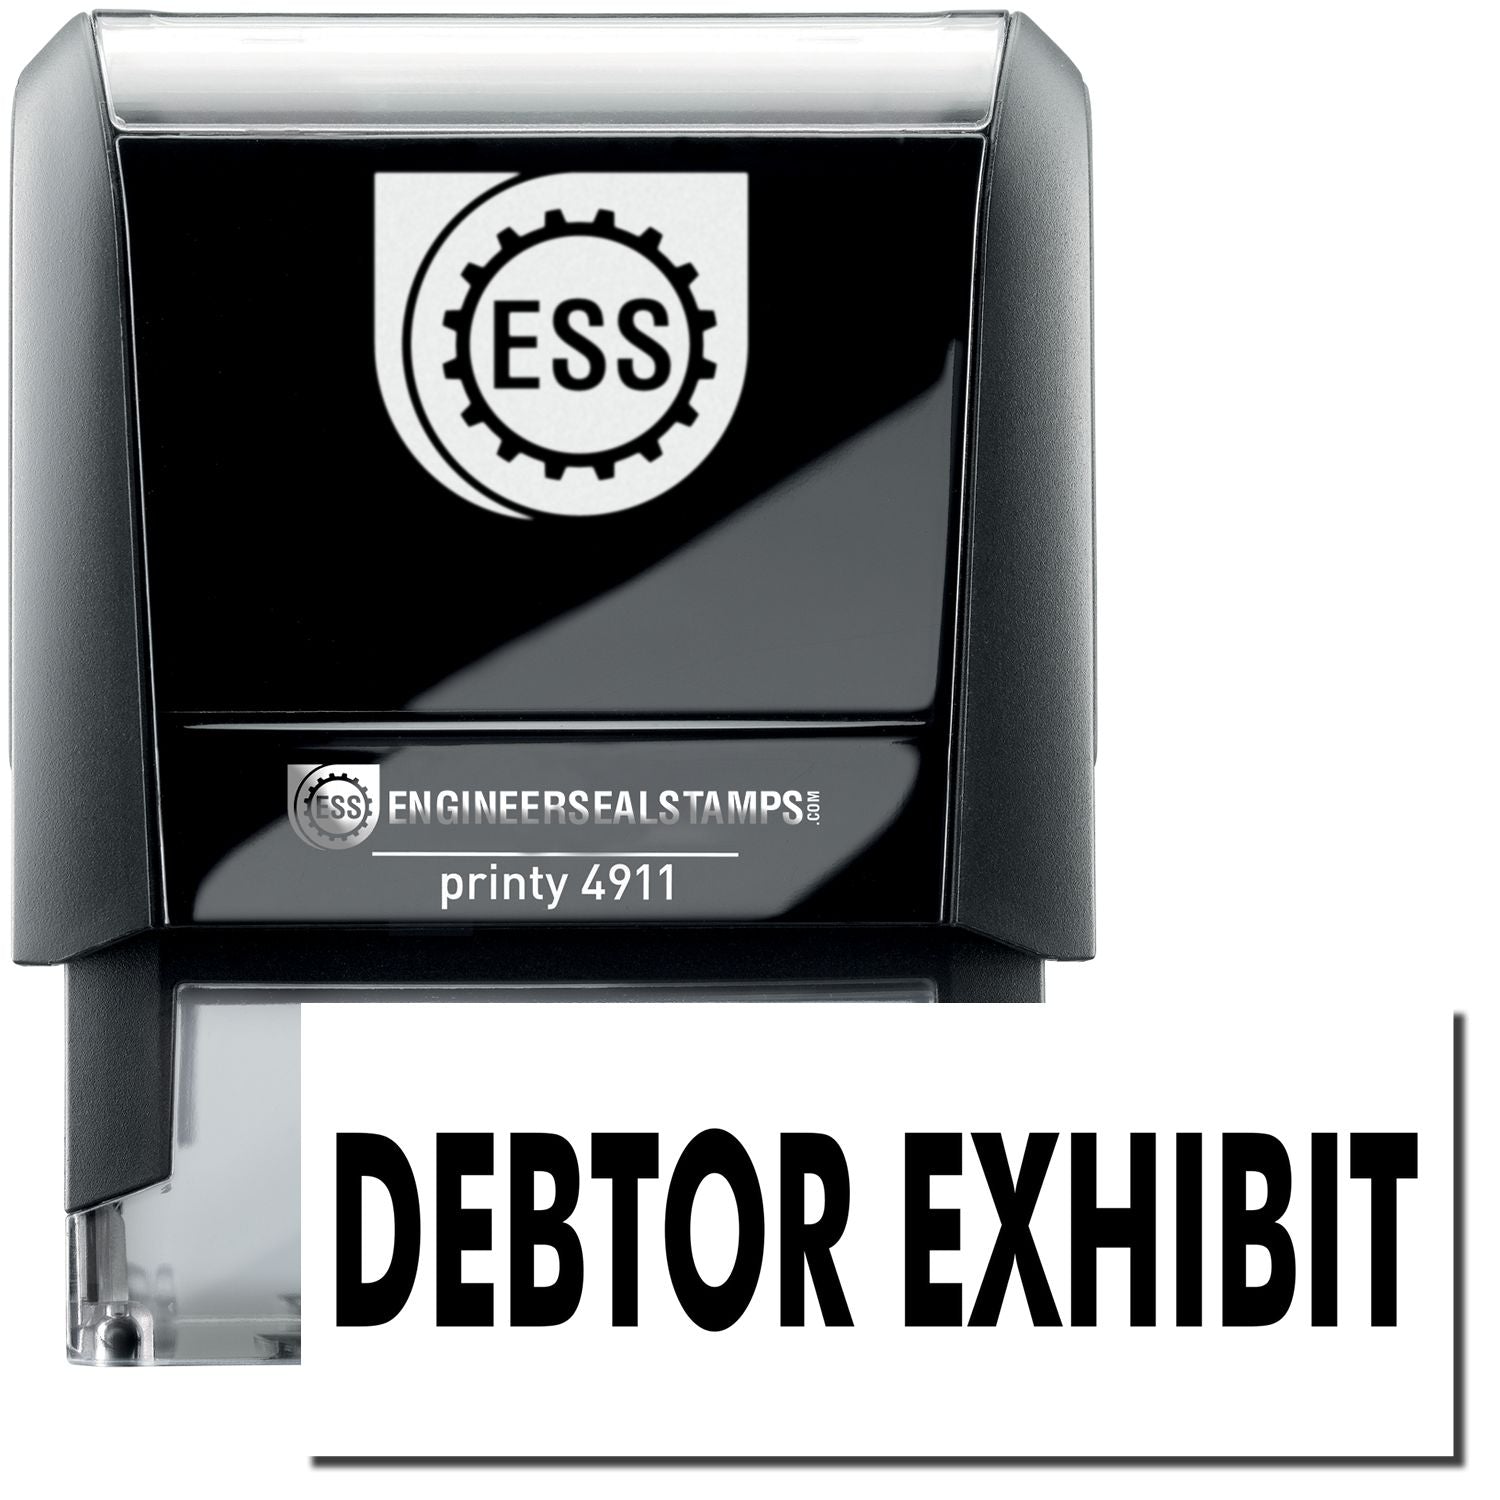 A self-inking stamp with a stamped image showing how the text "DEBTOR EXHIBIT" is displayed after stamping.